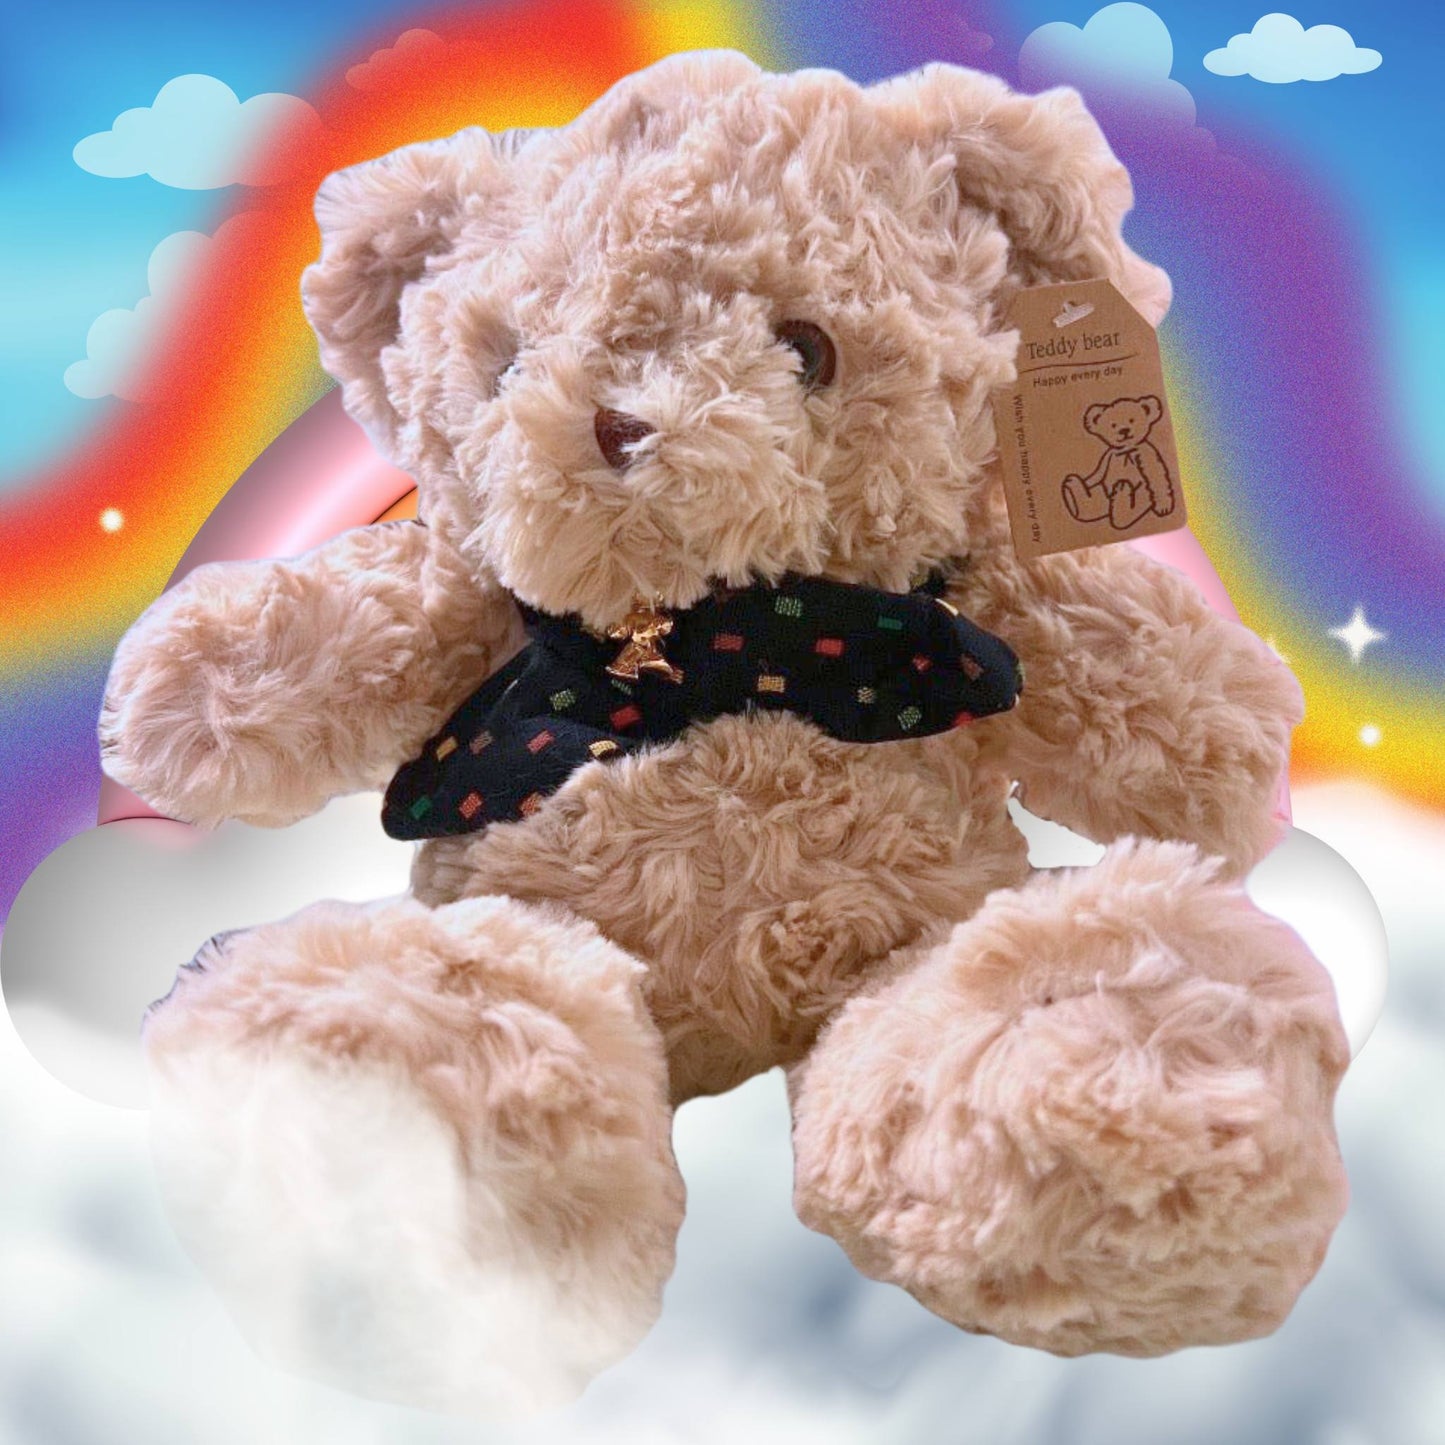 One Up Biscuit Soft Teddy Bear Toy (30cm)